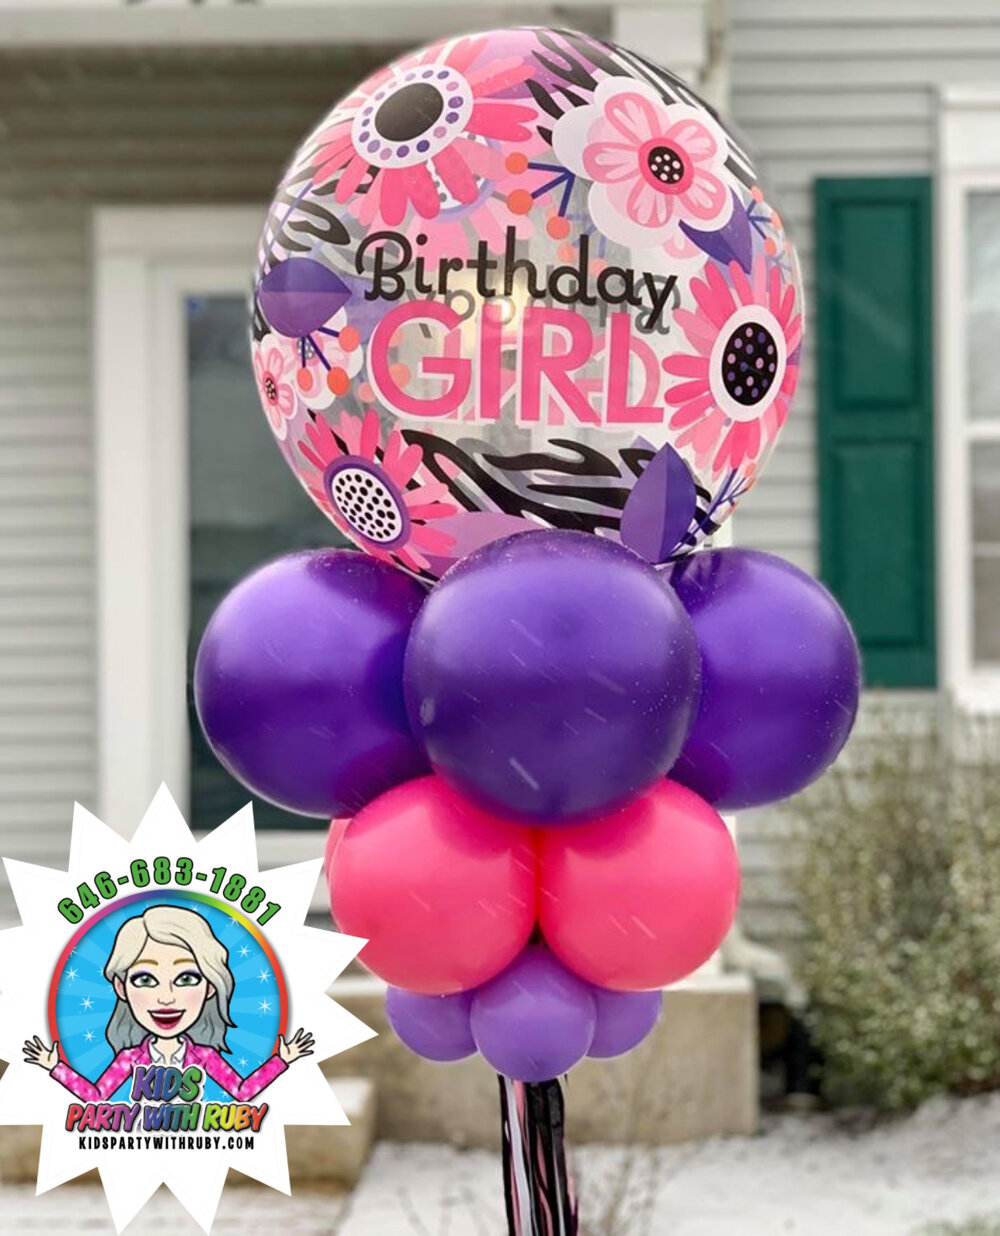 Kiezen leren Maestro 5FT BIRTHDAY BALLOON LOLLIPOPS (Free Pickup Ridgewood, NY) — KIDS PARTY  WITH RUBY, Party Entertainment NYC, Face Painter, Balloon Artist,  Characters, Queens, Brooklyn, Manhattan, NY